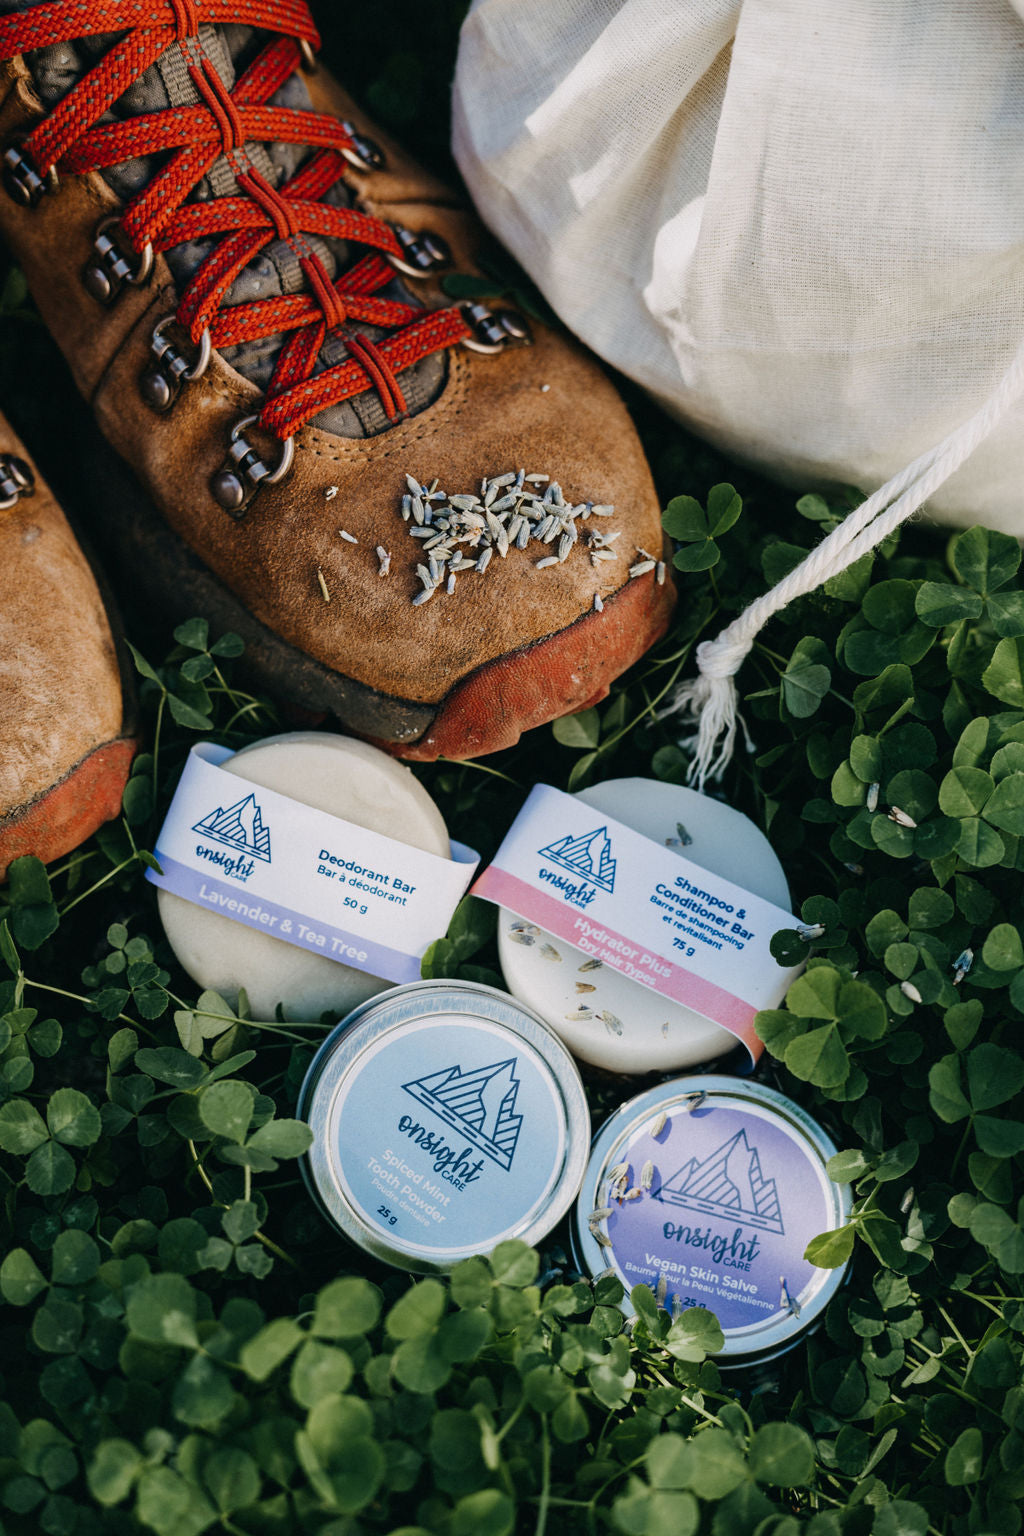 hiking boots with lavender sprinkled on top. Deodorant bar, shampoo & conditioner bar, tooth powder, vegan skin salve, and cotton bulk bag delicately sitting around hiking boots in the clover grass.